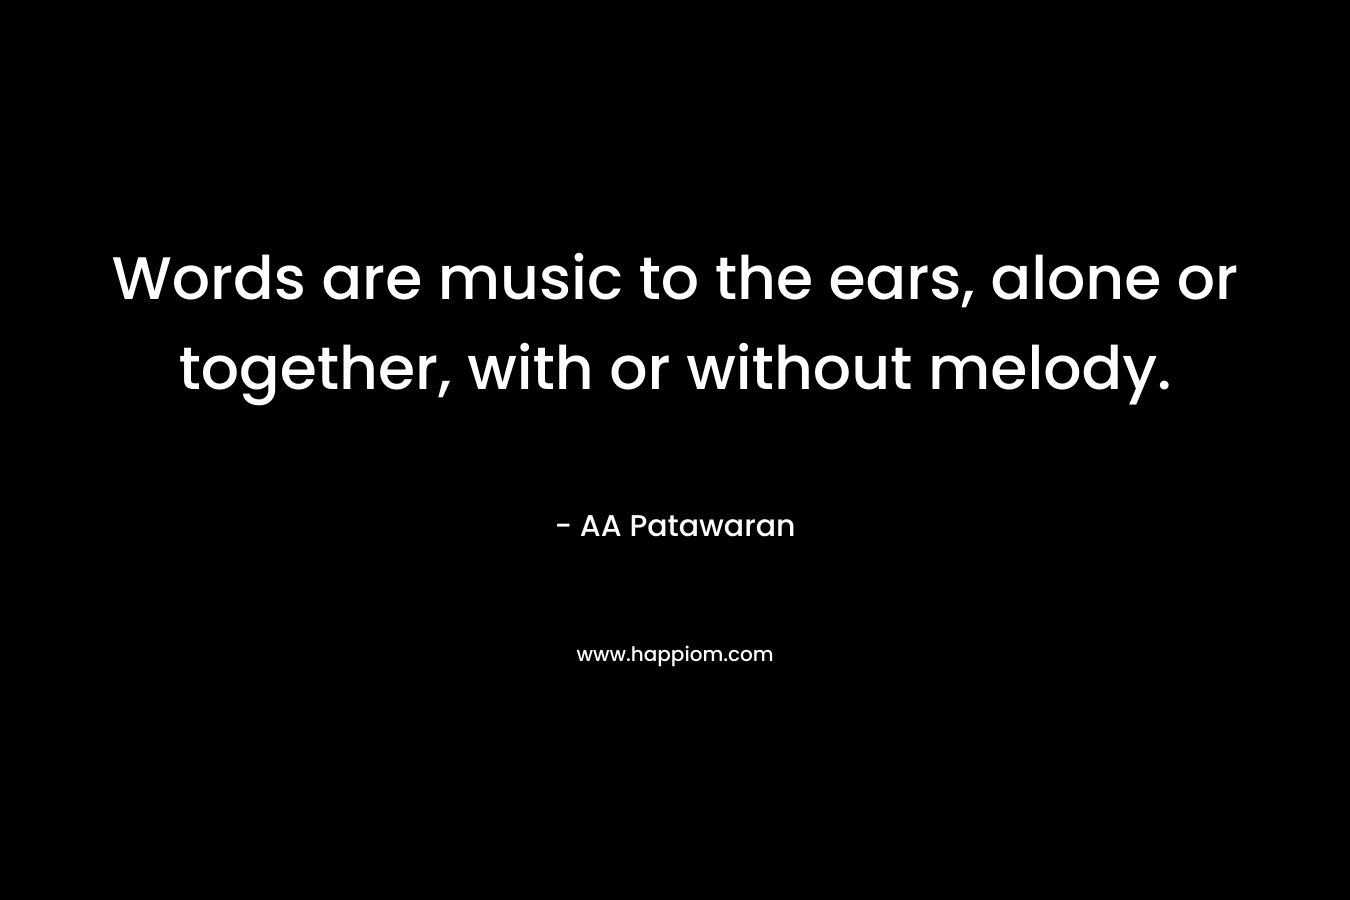 Words are music to the ears, alone or together, with or without melody.